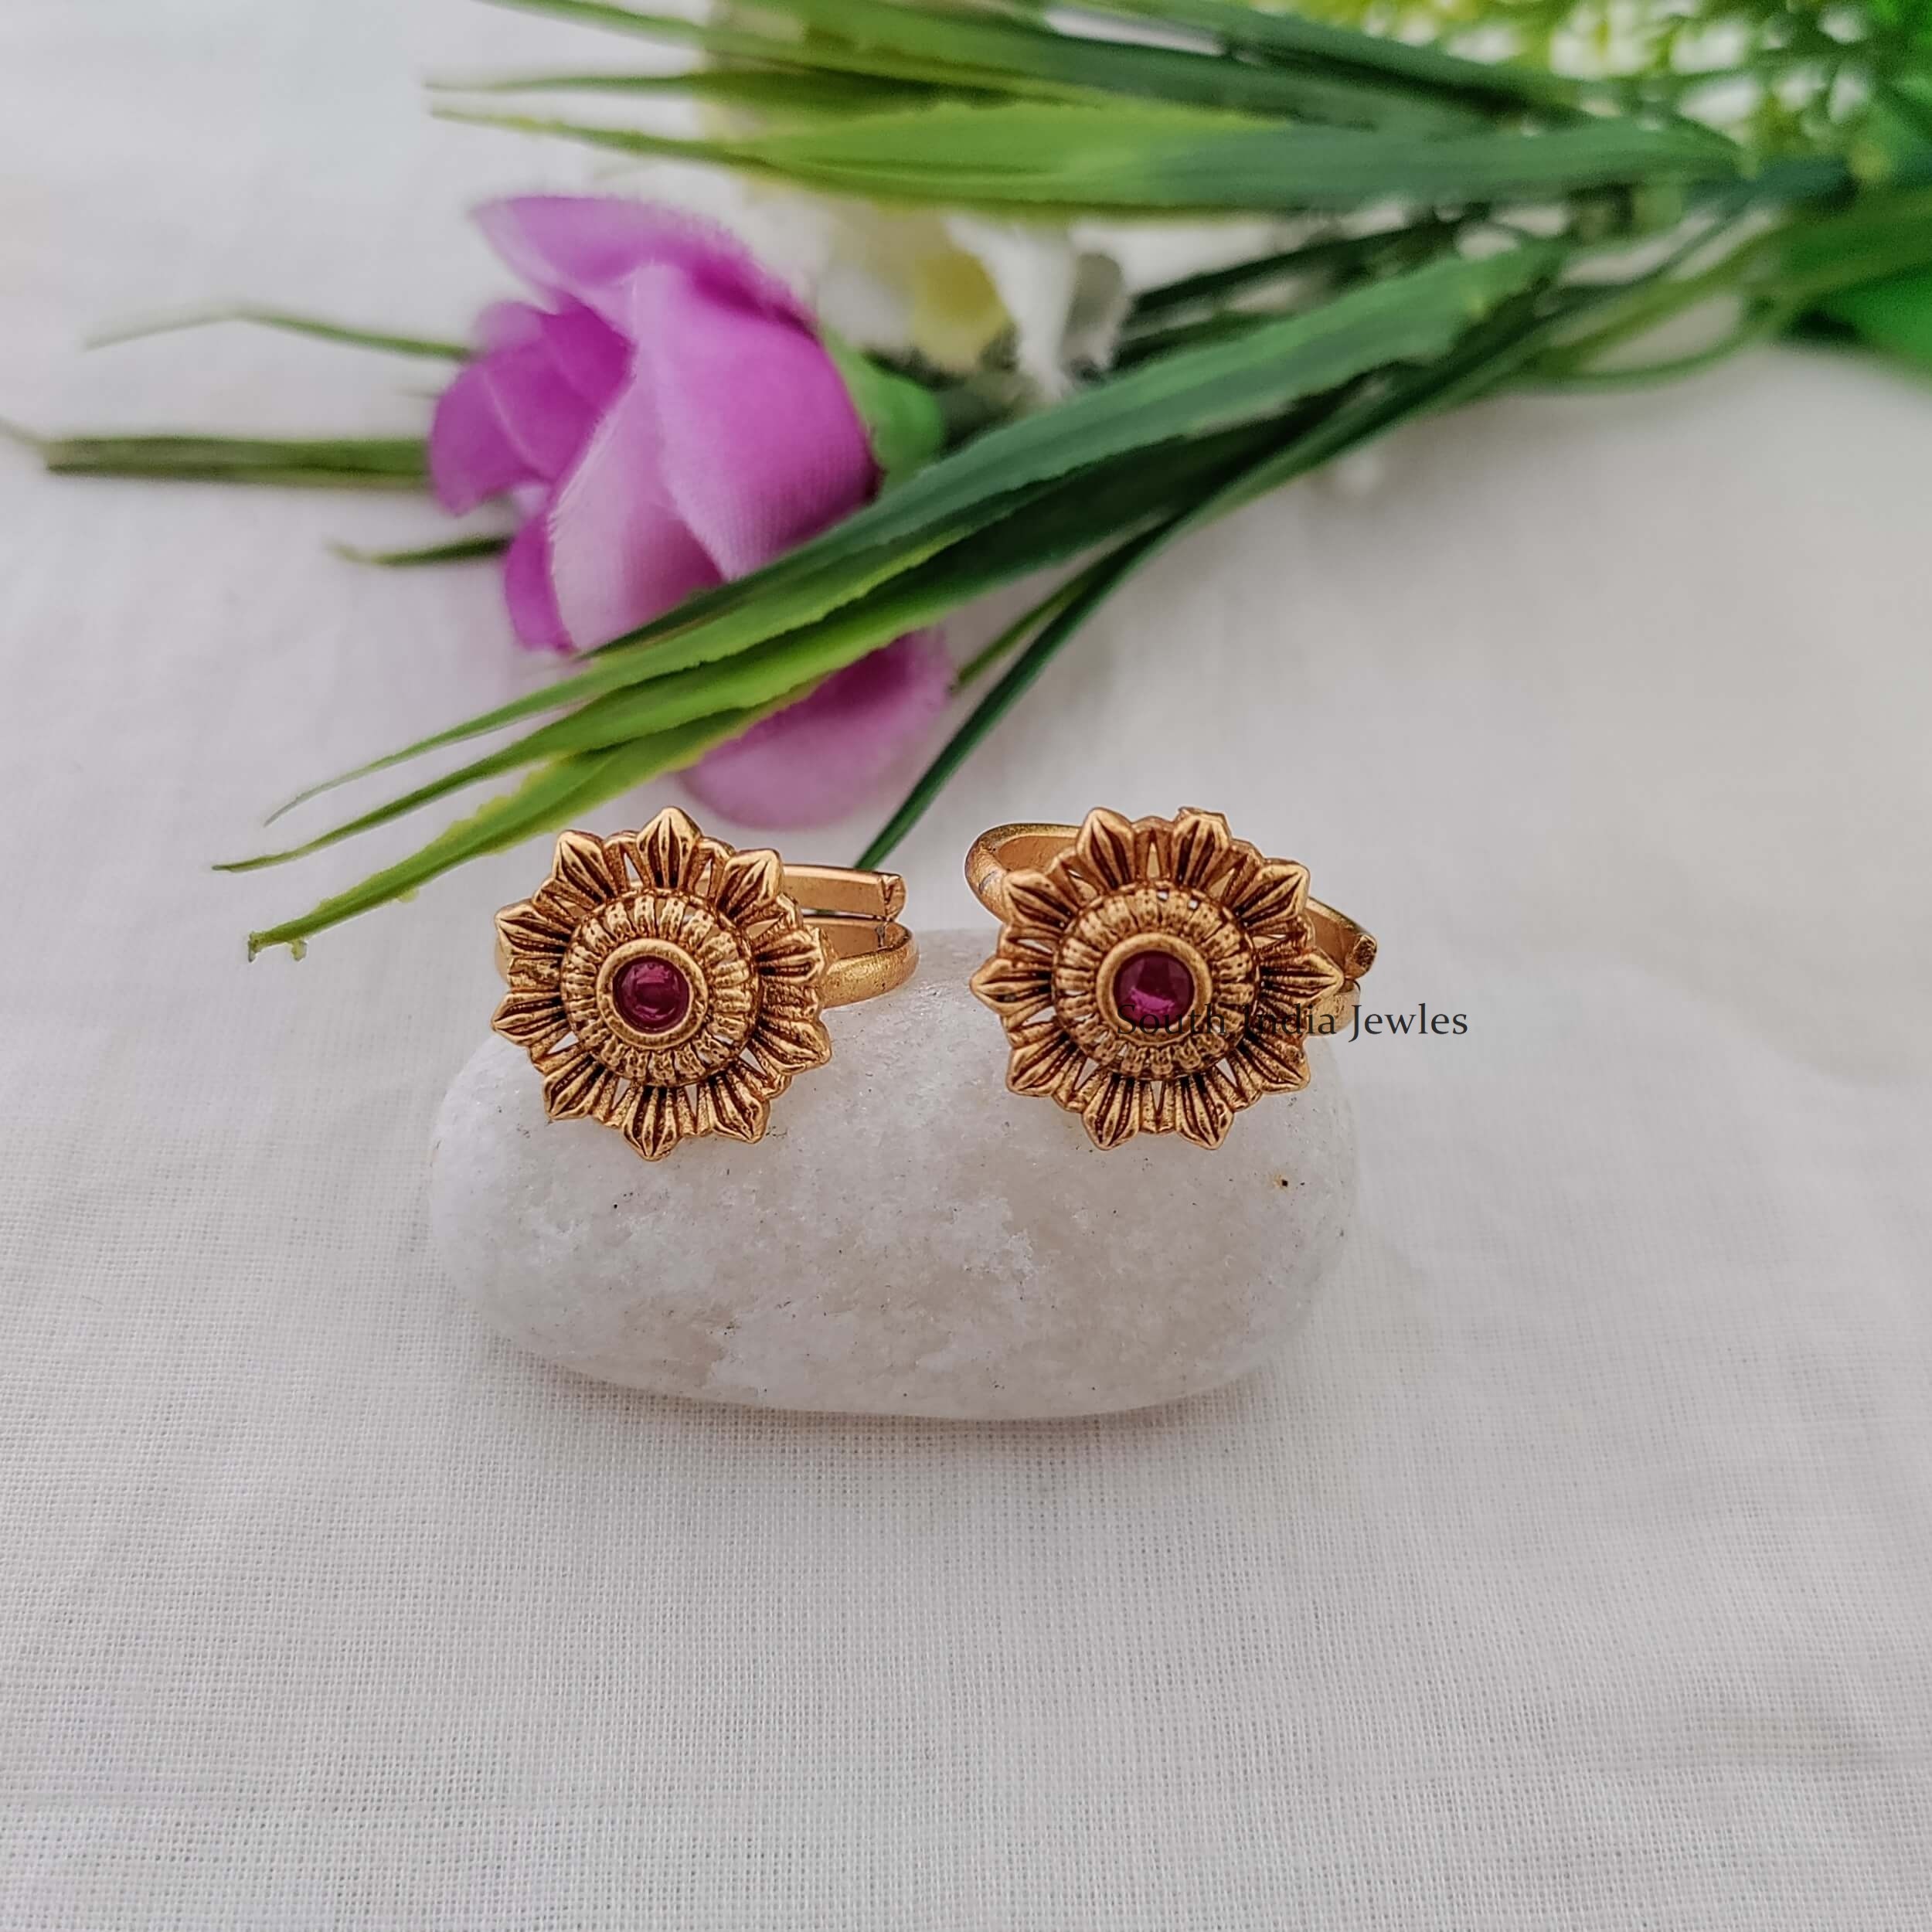 Buy Antique Golden & Silver Color Metal Top Earrings/ Stud Earrings for  Women - 12 Pairs - Earrings at Best Prices in Bangladesh | Othoba.com